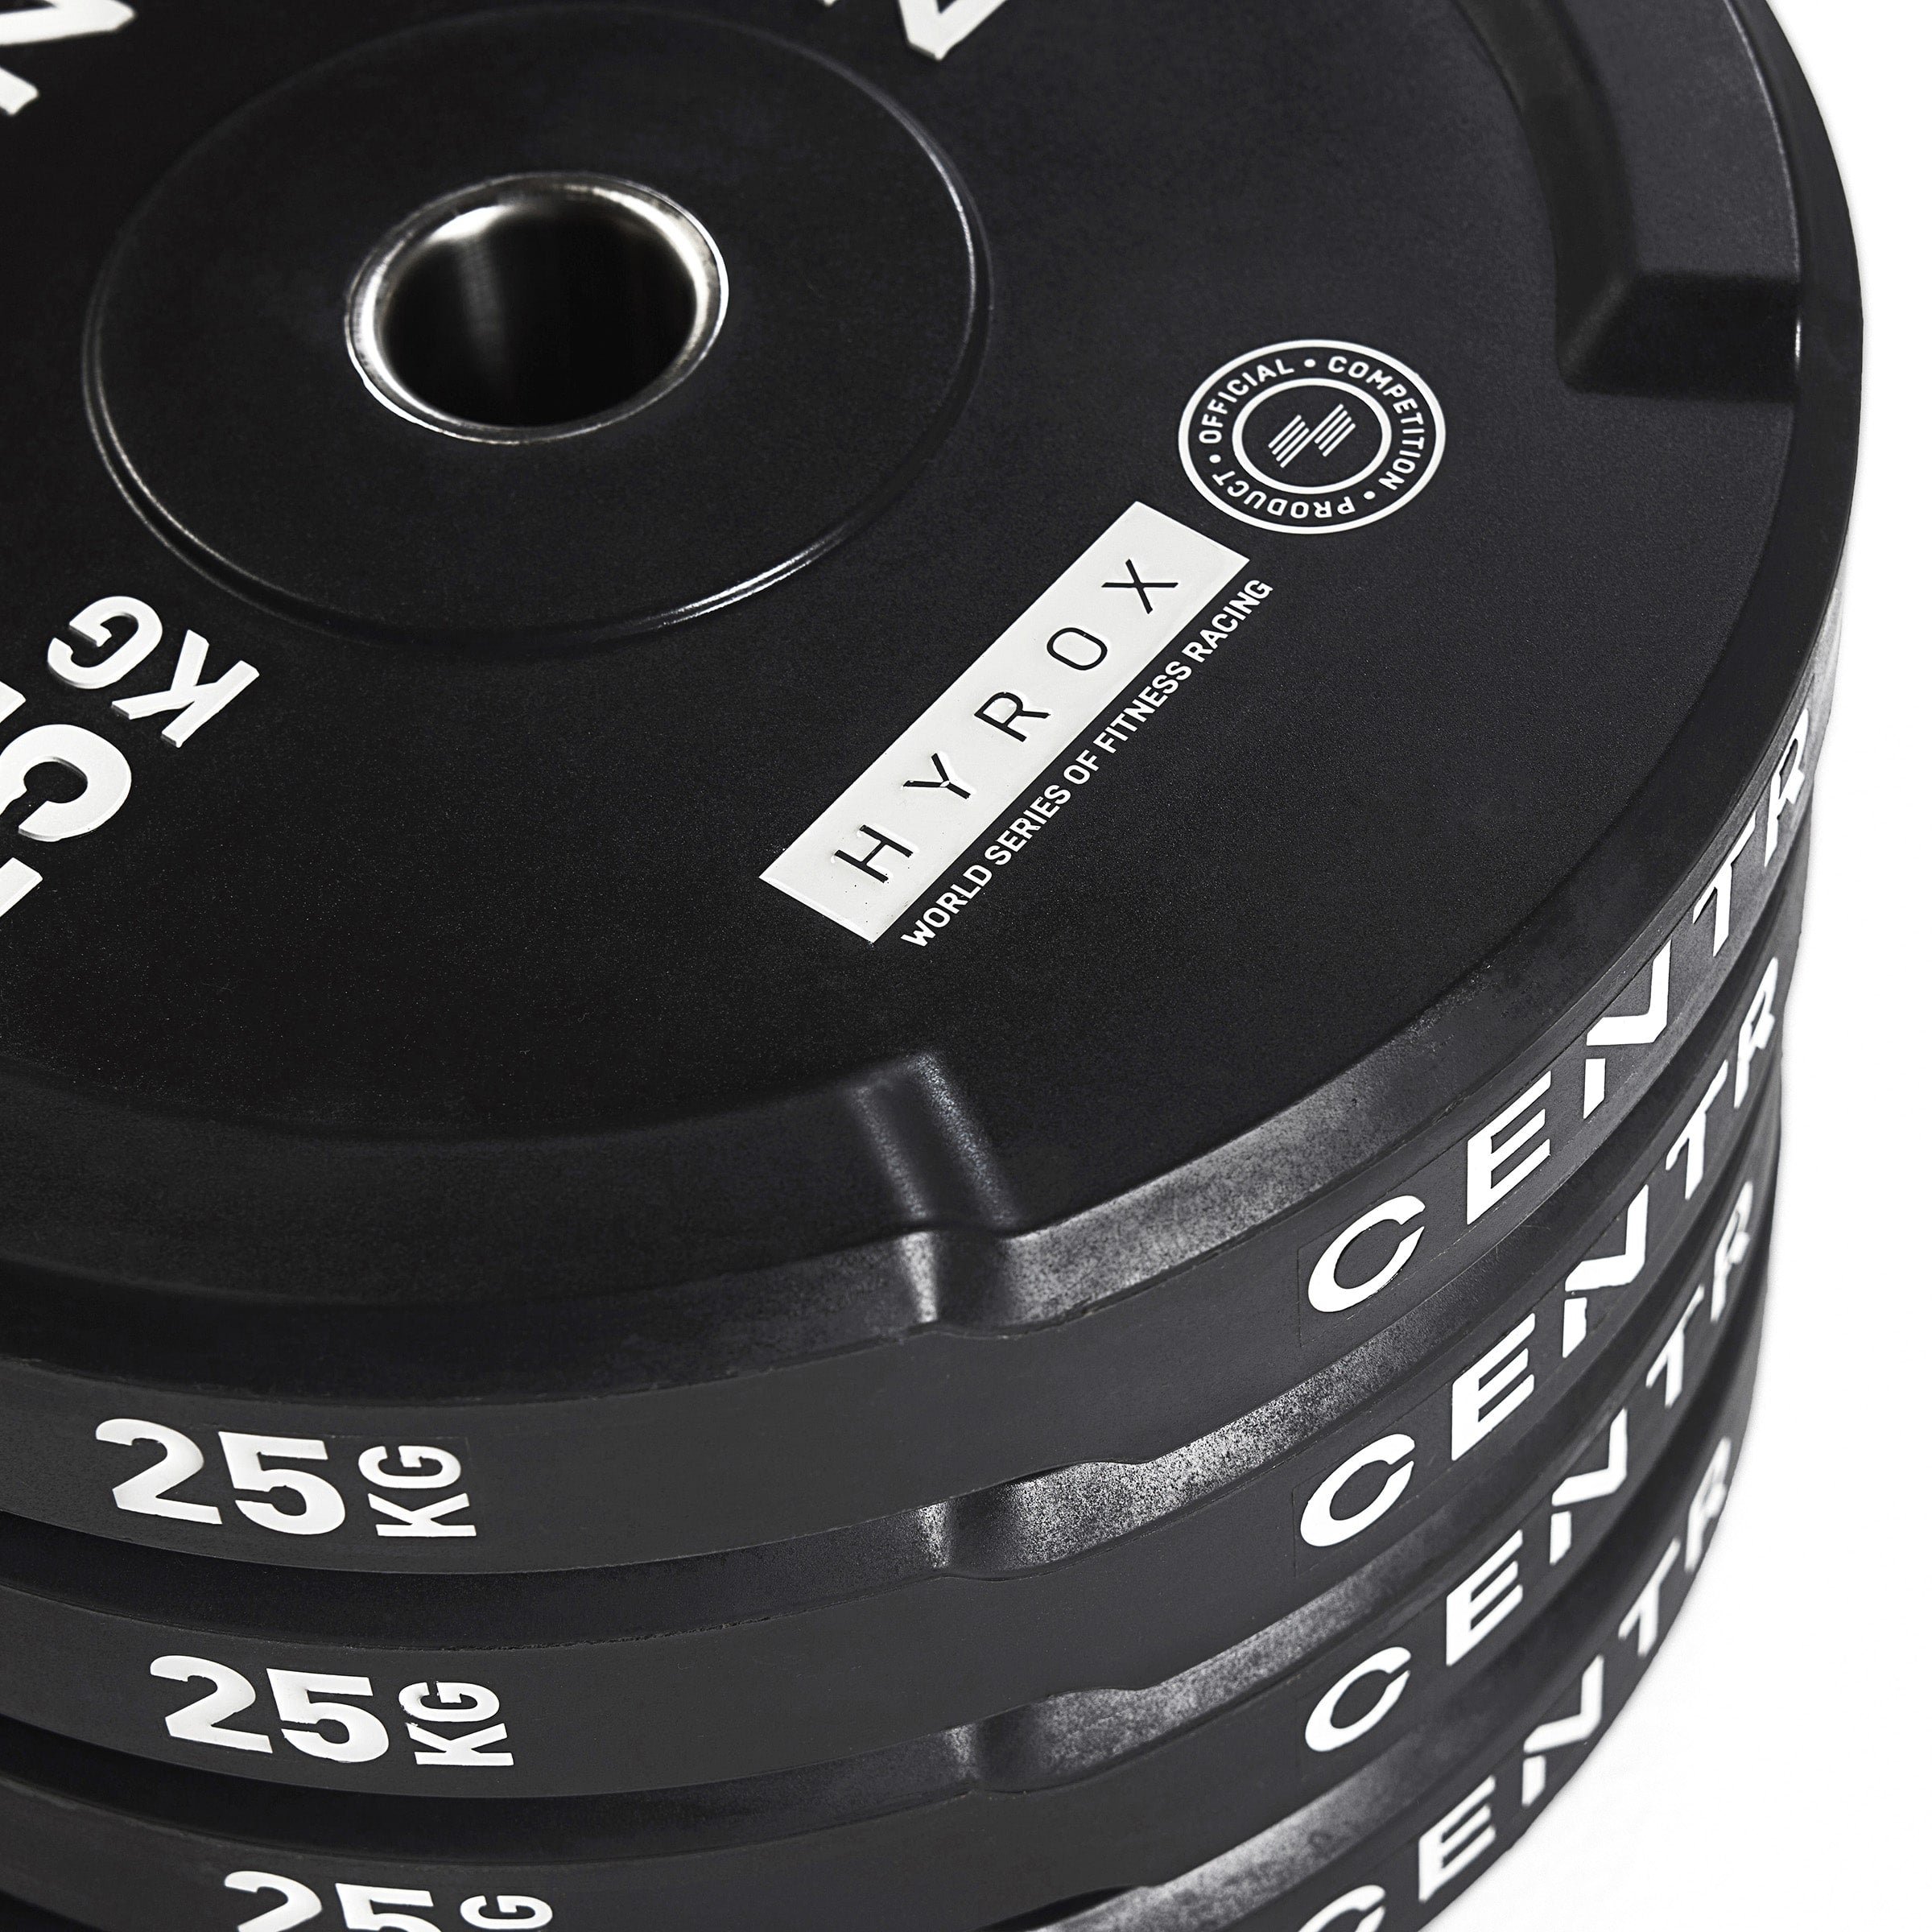 CENTR x HYROX Competition Edge 25kg Bumper Plate (SHIPPING EARLY MAY)